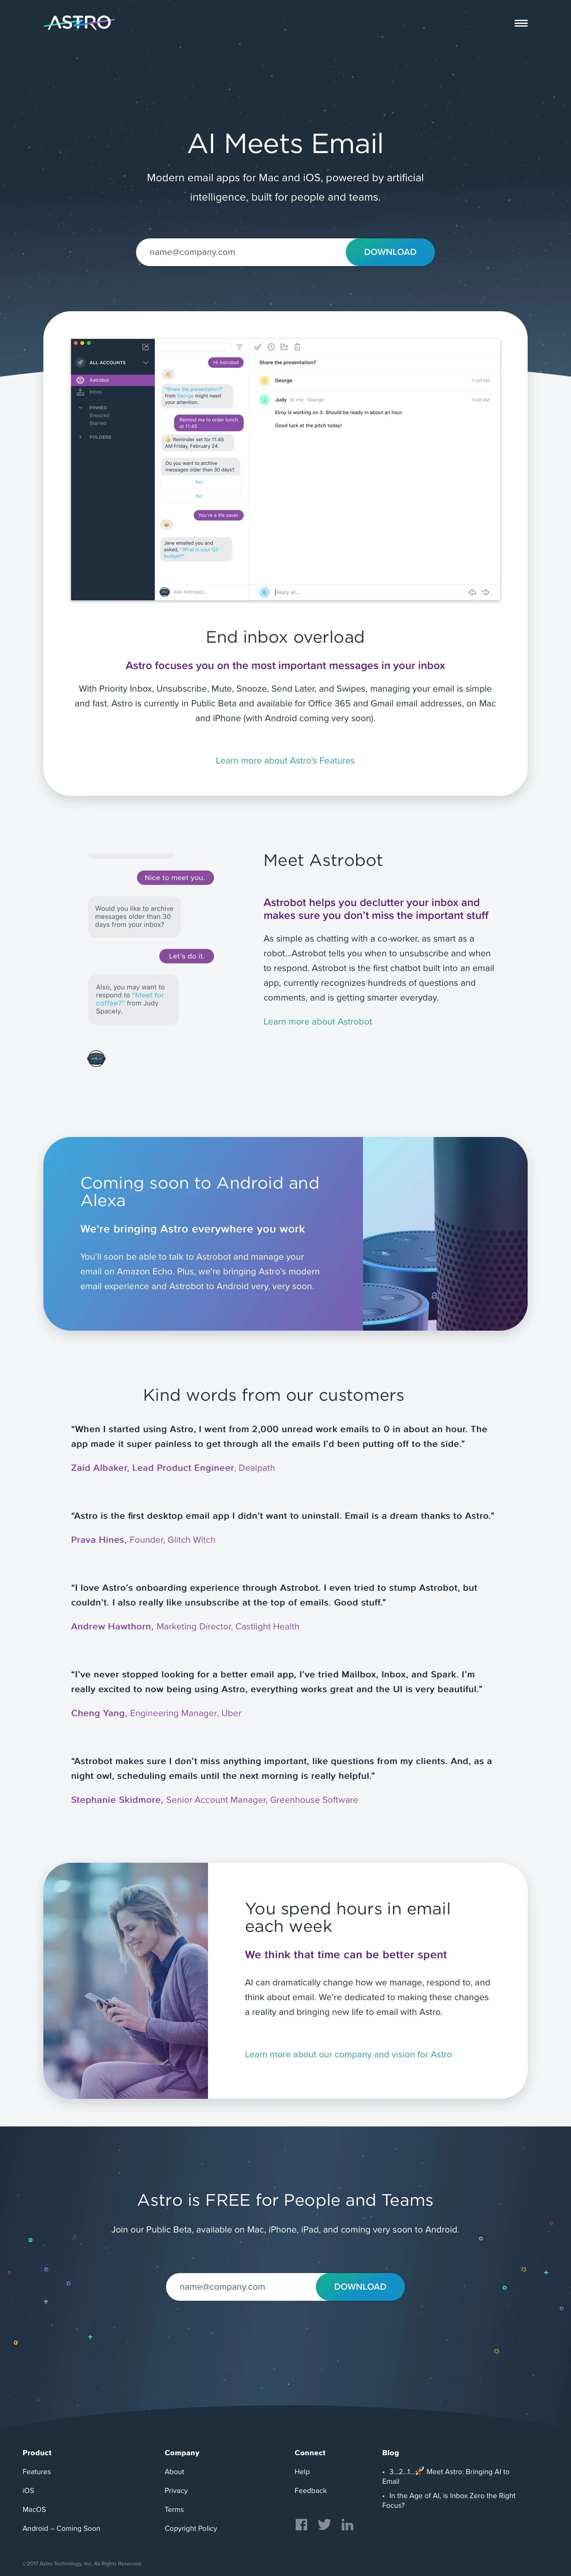 Astro Landing Page Example: Modern email apps for Mac and iOS, powered by artificial intelligence, built for people and teams.